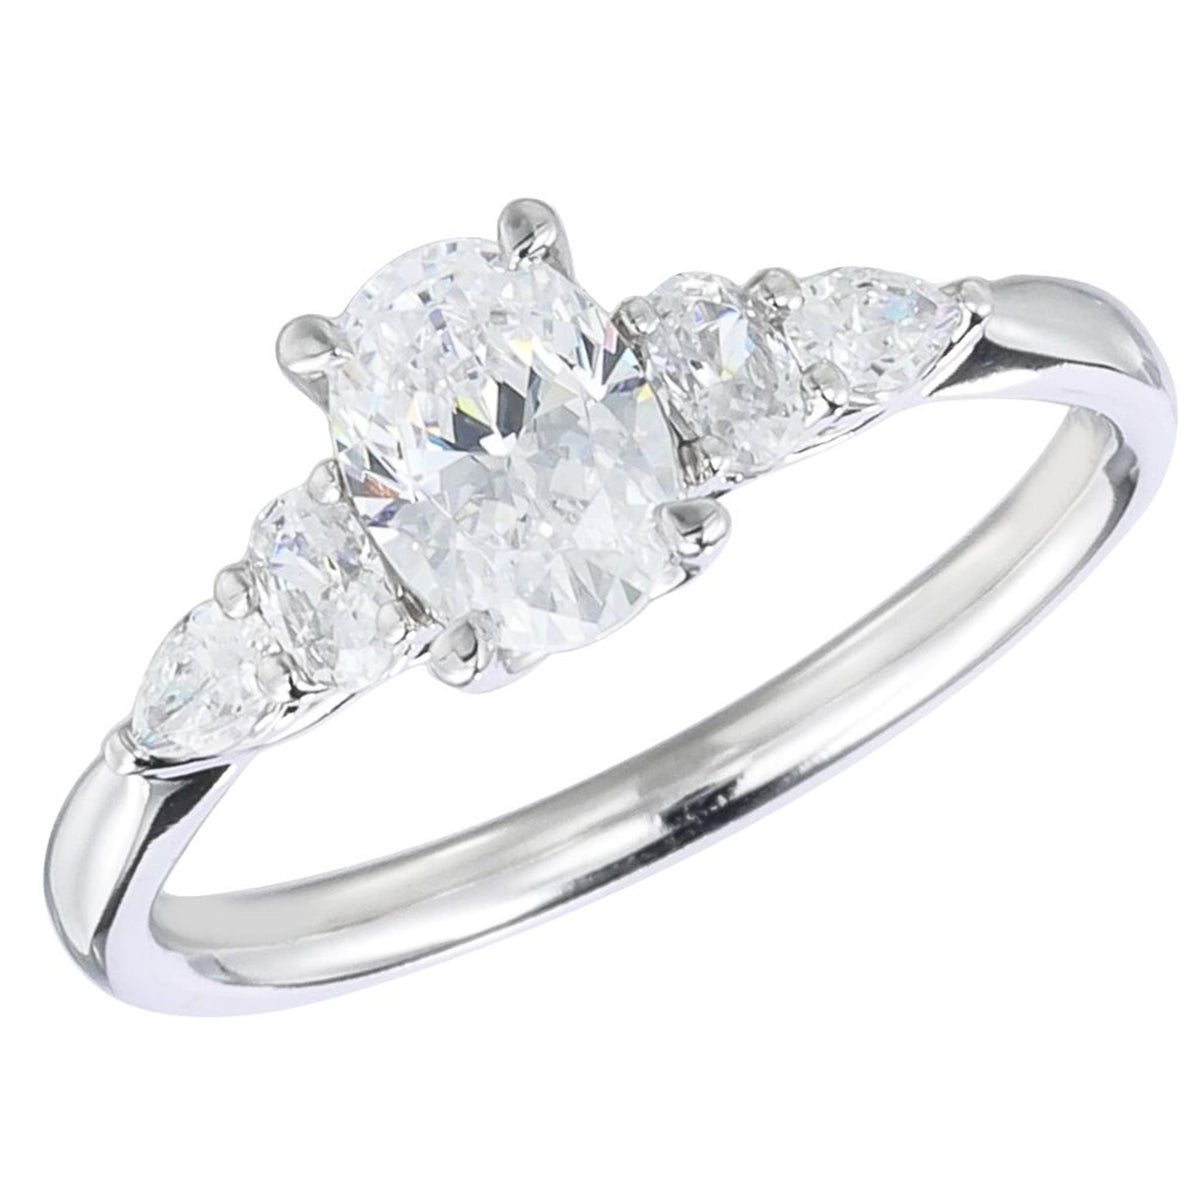 14Kt White Gold Engagement Ring Mounting With 0.14cttw Natural Diamonds